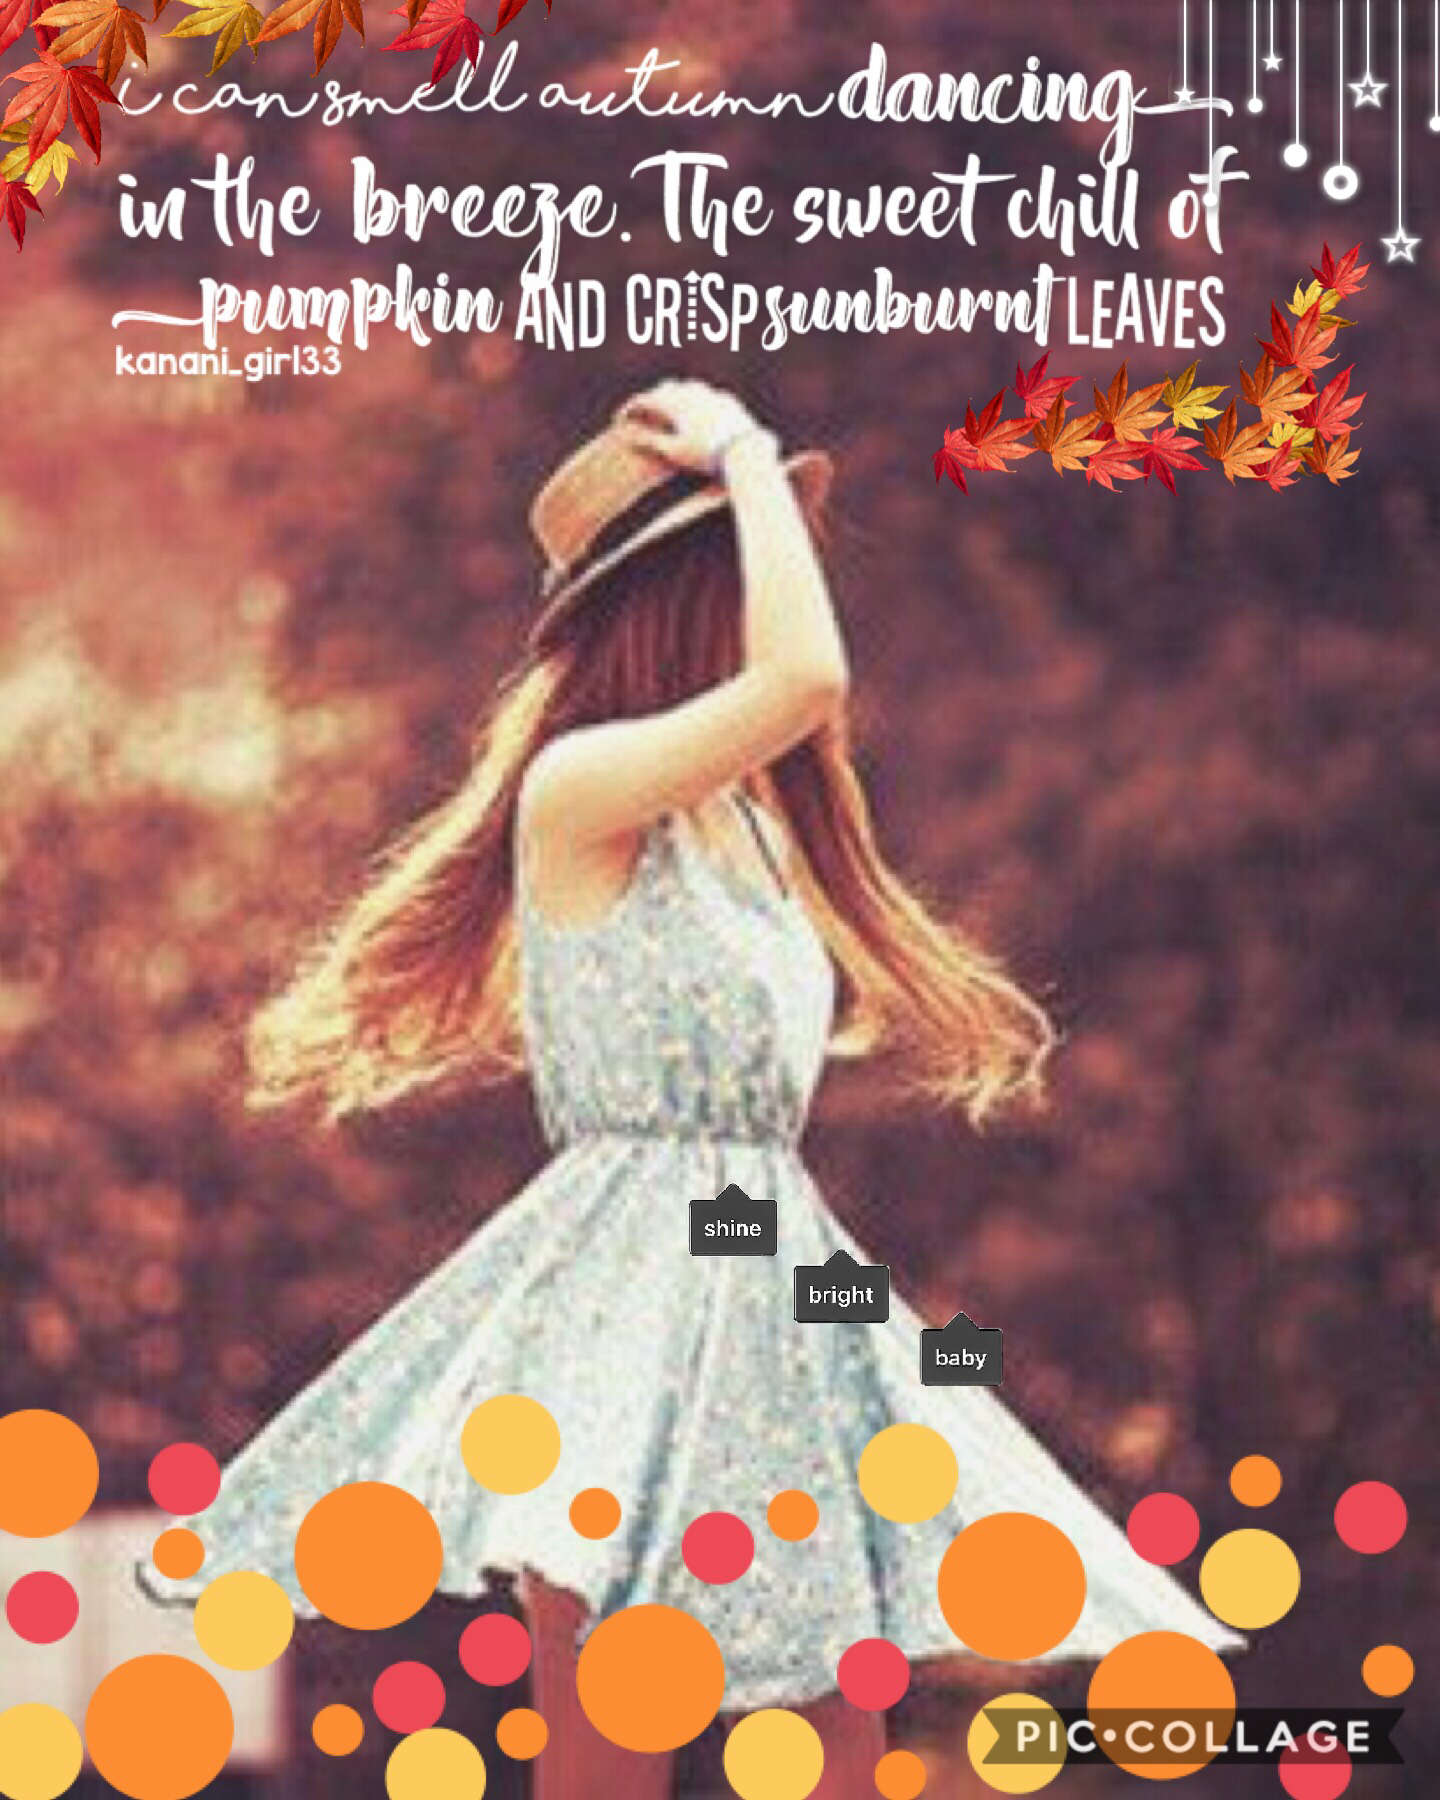 I entered this into @PicCollage’s fall theme contest!!! Rate /10!! Qotd: what’s your favorite thing to do in autumn? 